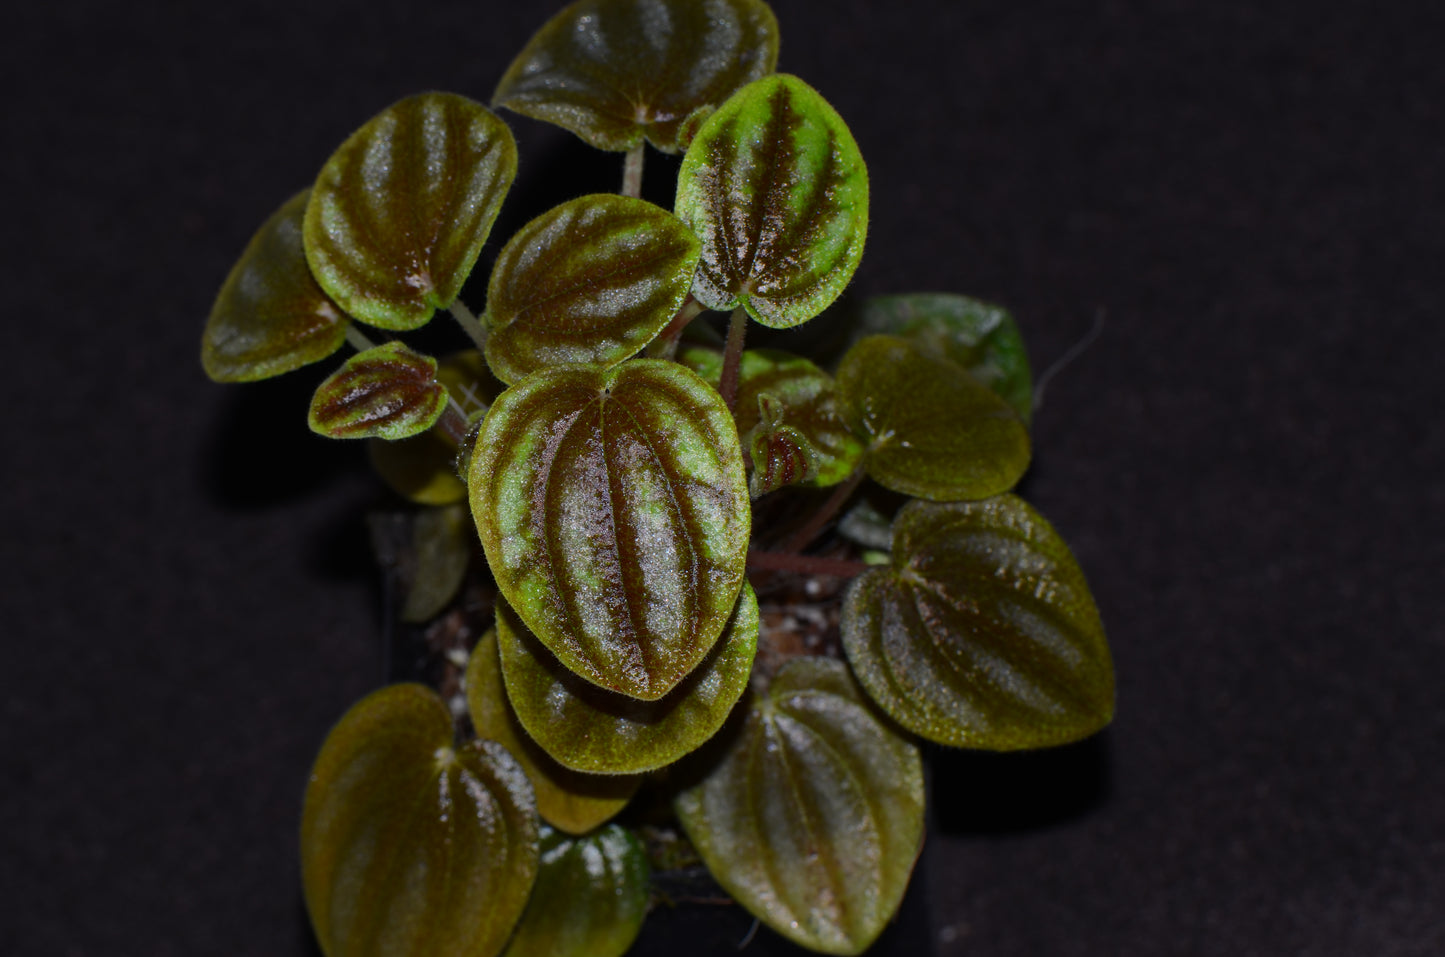 Peperomia sp. "Colombia"